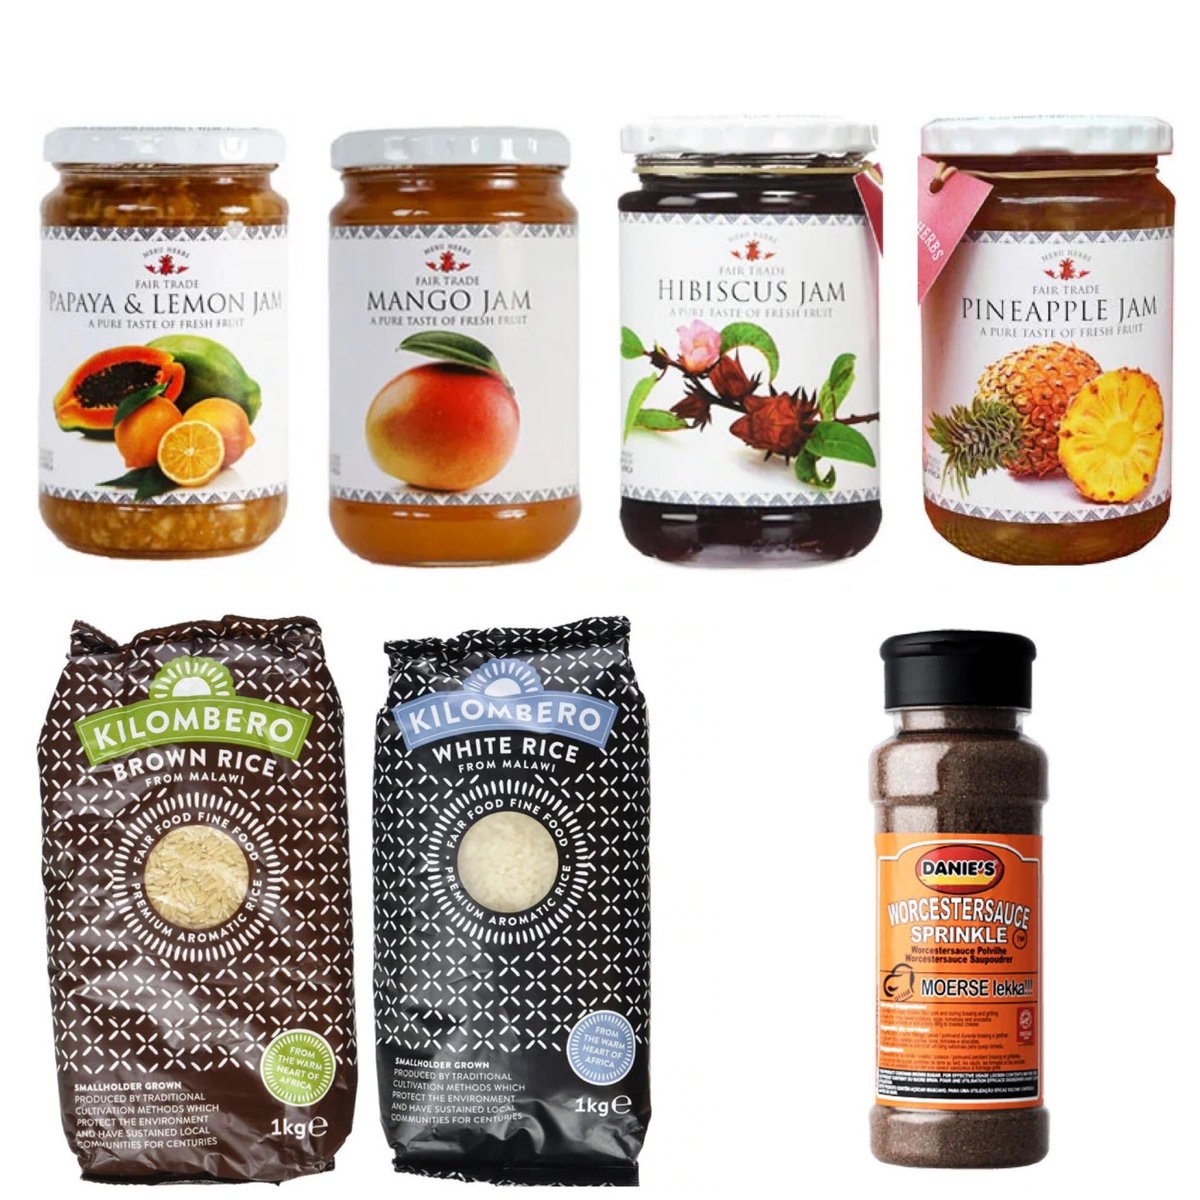 Check out our NEW STOCK! Add our #meruherbs #jams #kilomberorice & #daniesworcestershiresaucesprinkle to your shopping list! >>> yourexpatshop.com/collections/ne…

#yourexpatshop #newinstock #newstock #southafricanfood #southafricangroceries #southafricansintheuk